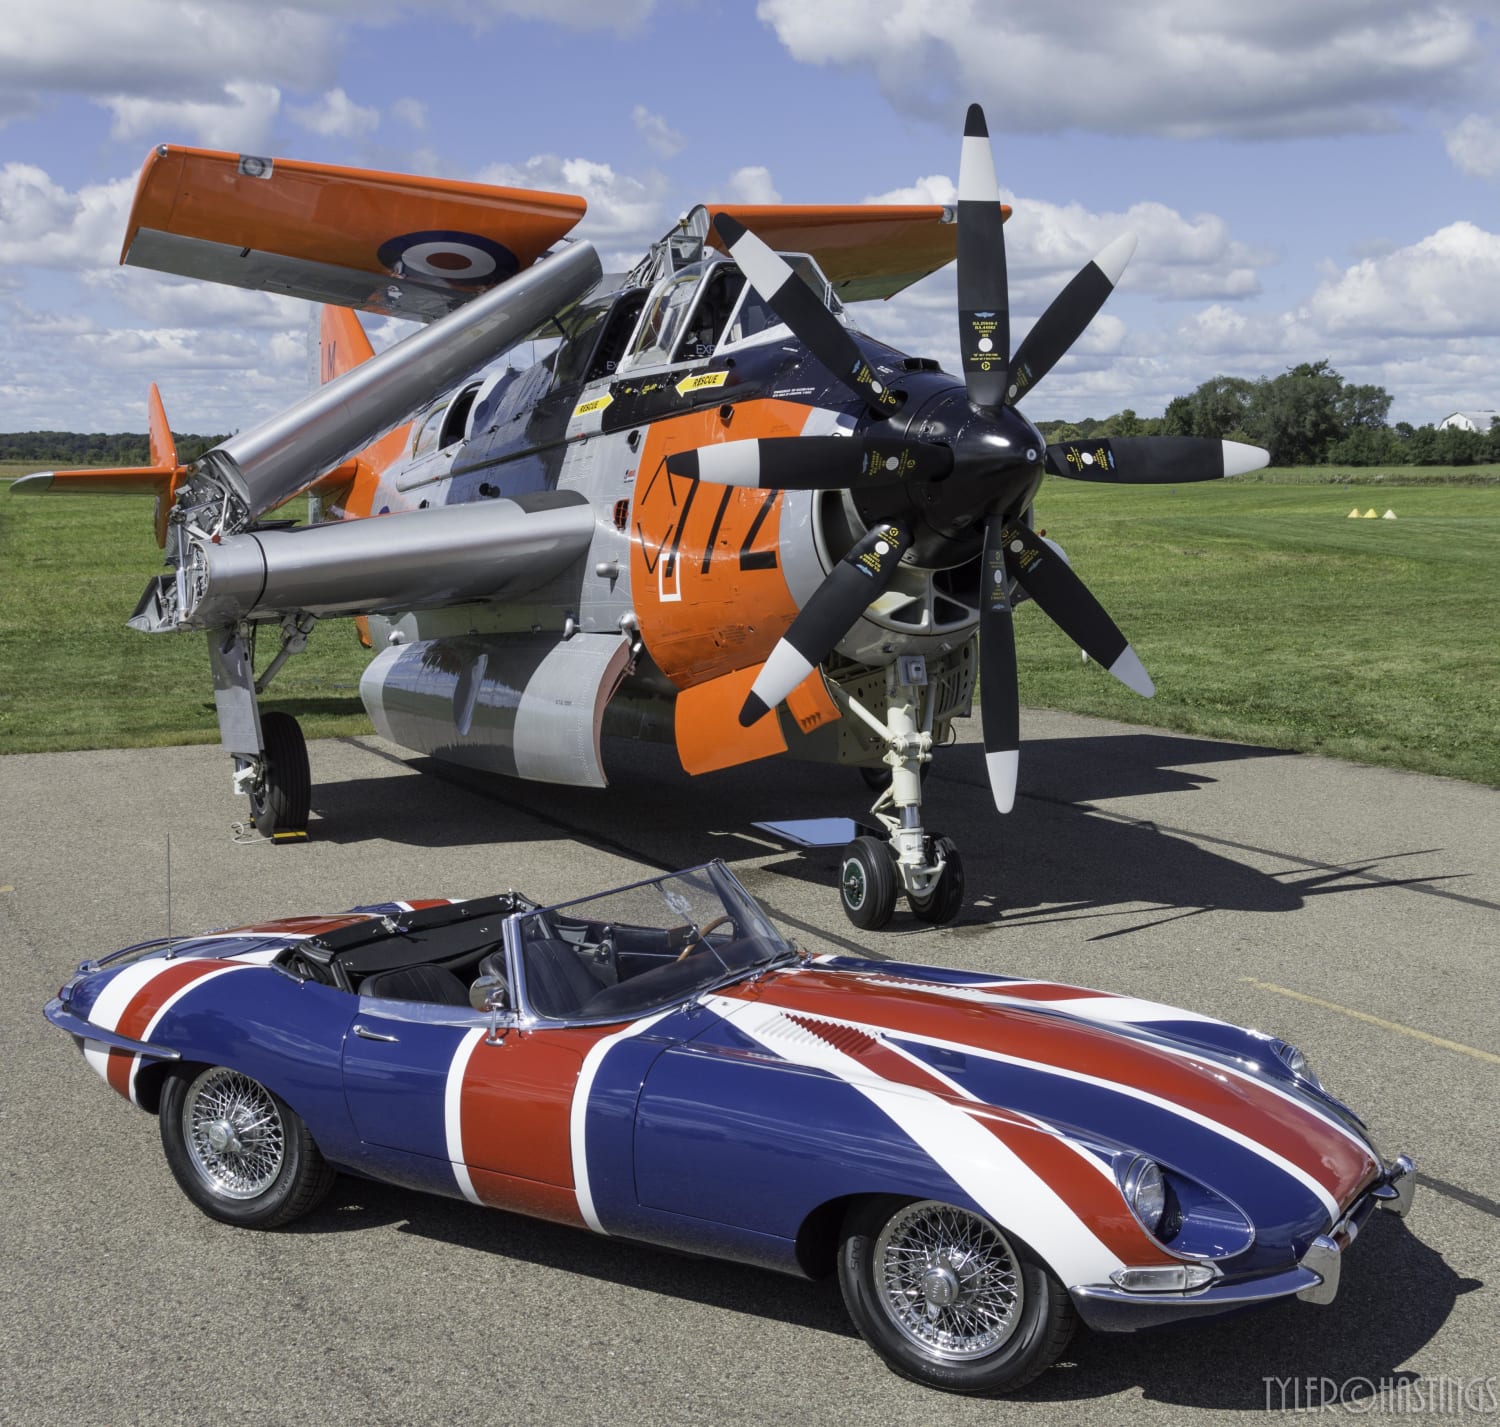 I left a note in this guys Jaguar to call me. Figured it'd be a good photo op with the Fairey Gannet. 2016